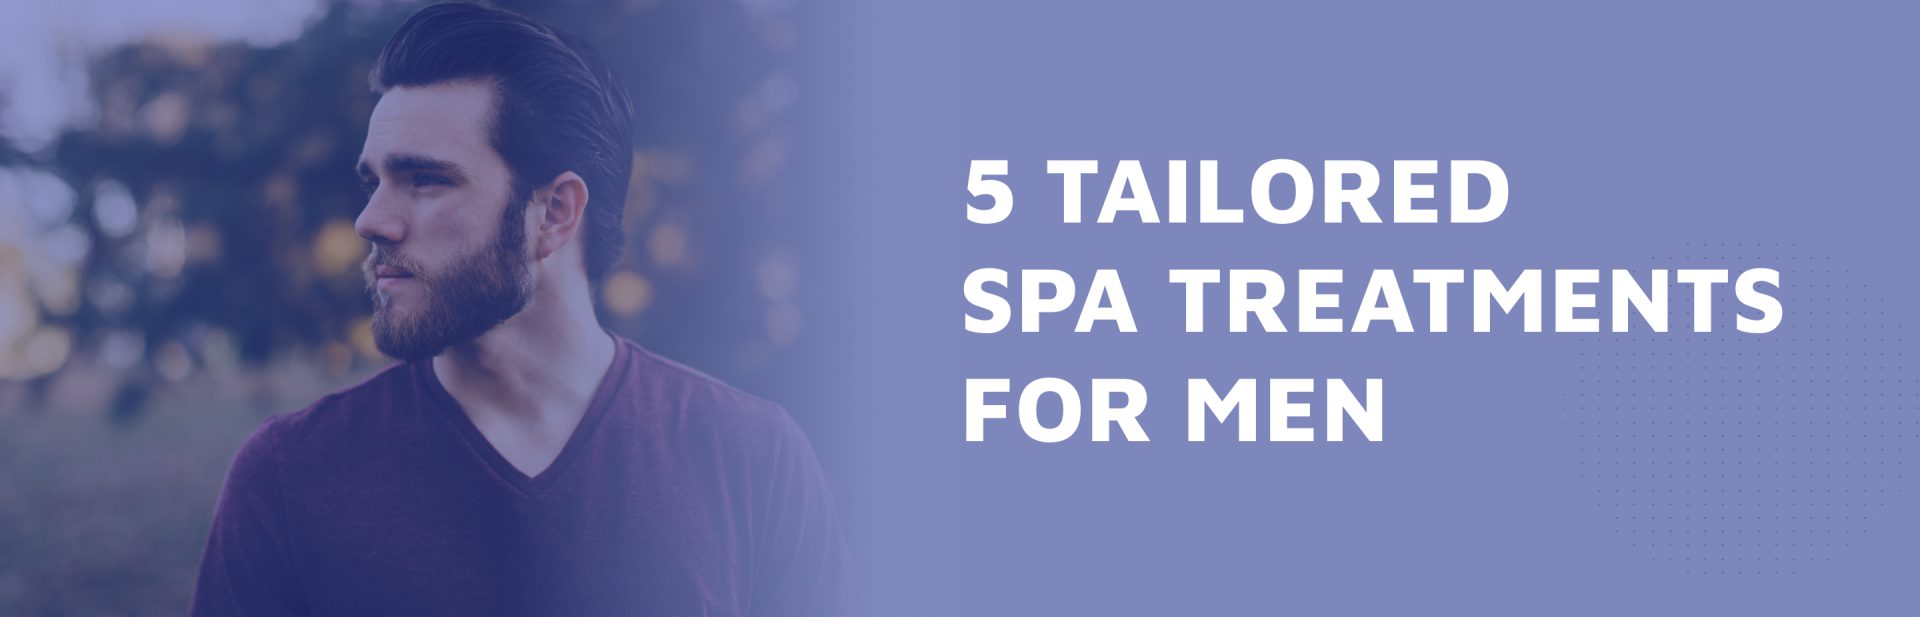 5-Tailored-Spa-Treatments-for-Men